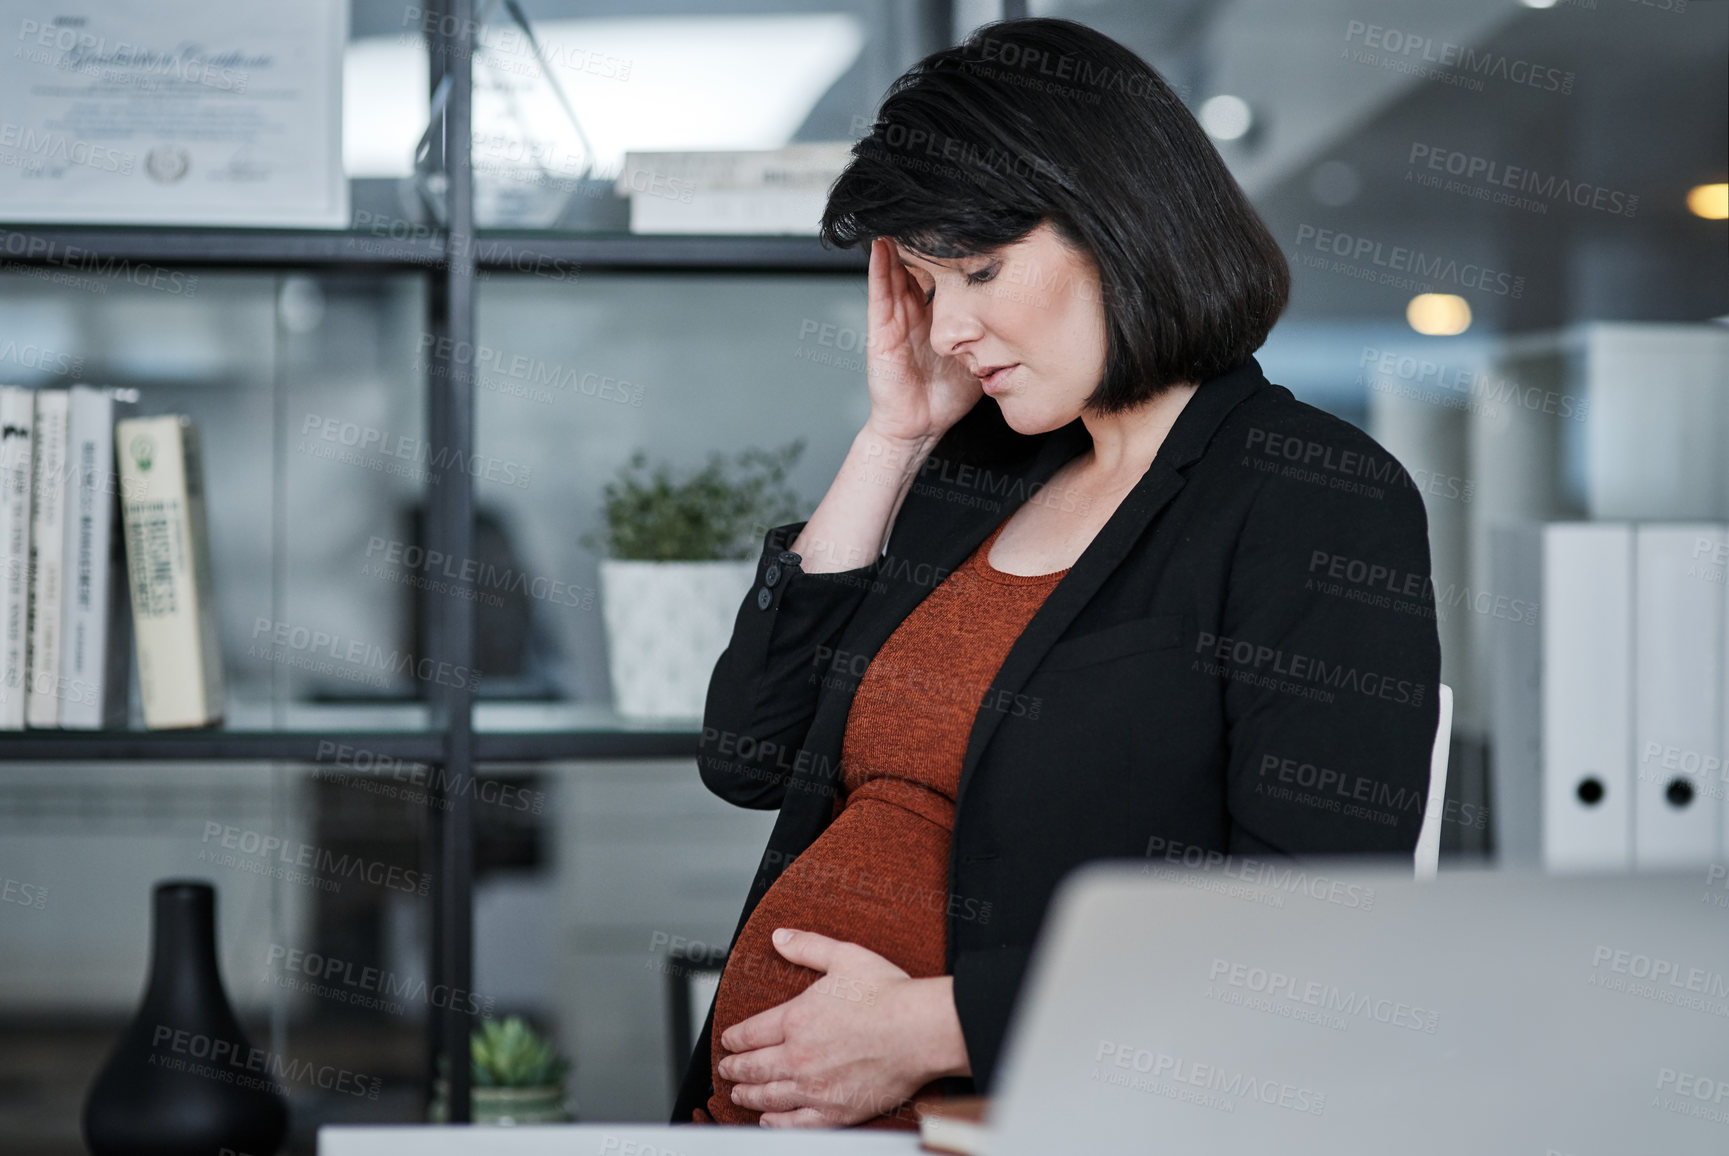 Buy stock photo Cropped shot of an attractive businesswoman sitting and feeling stressed while holding her pregnant tummy in the office